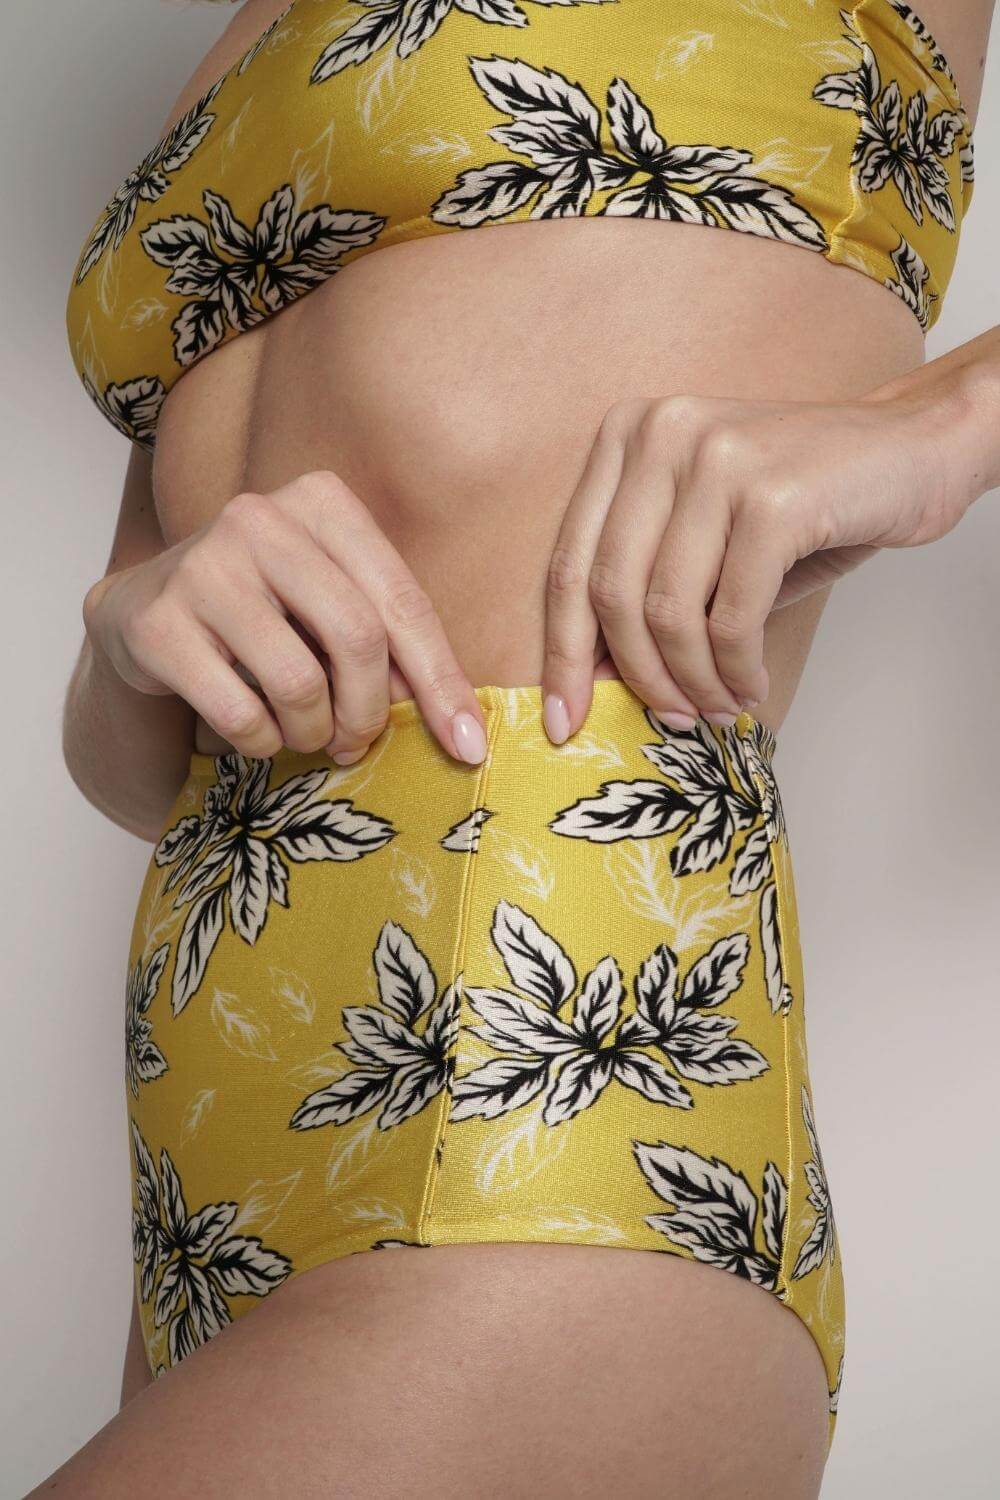 Detail of the supportive seams of the yellow print high waisted bikini bottom.